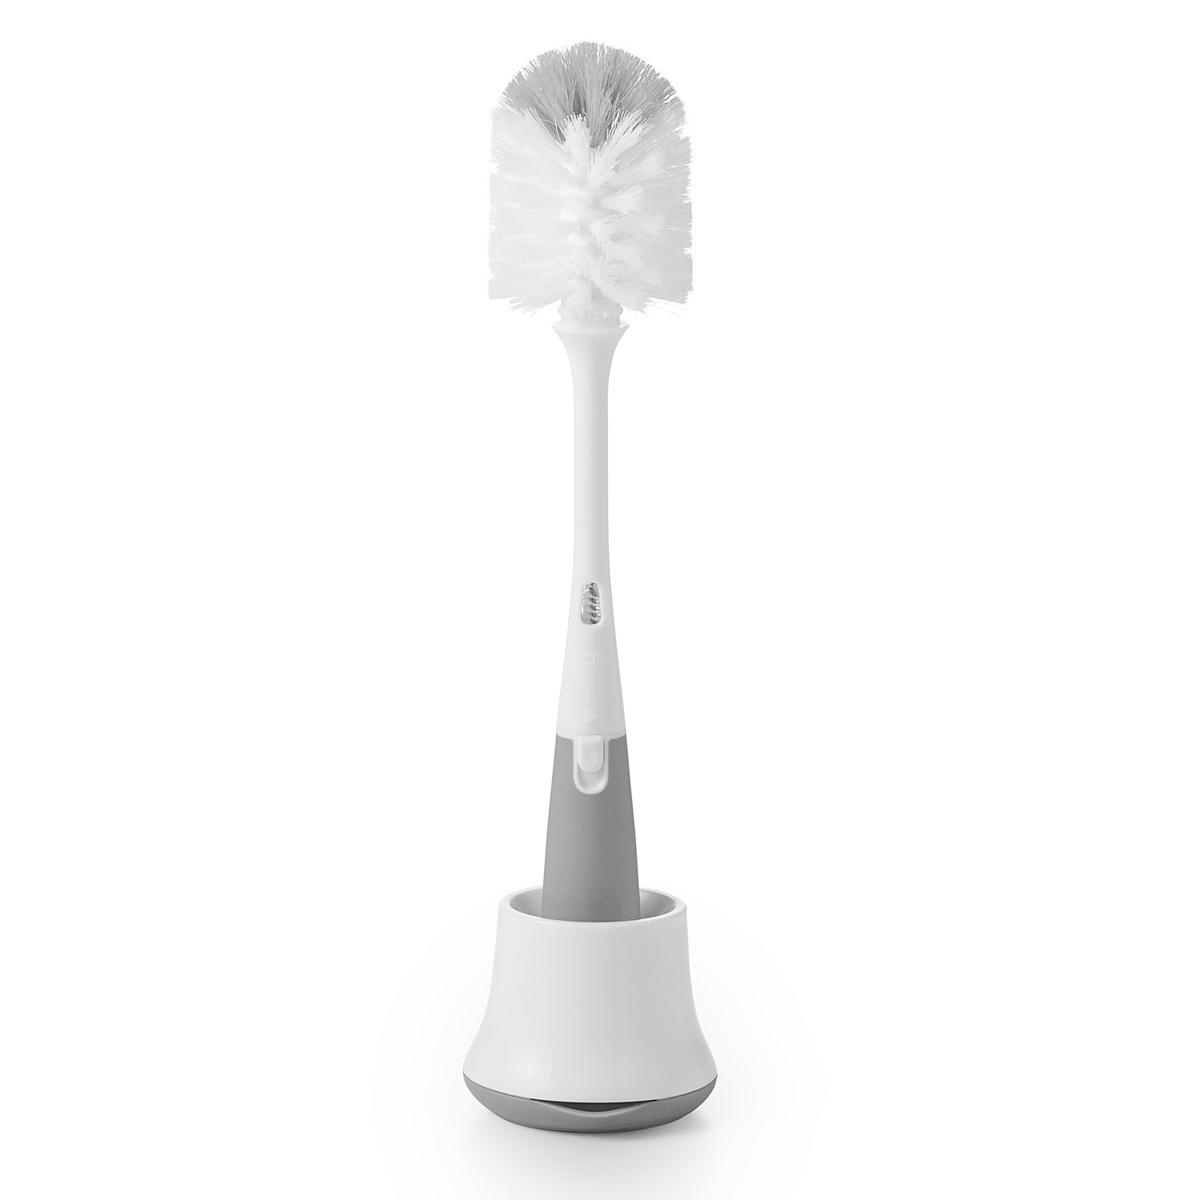 OXO Tot Bottle Brush Detail Cleaner and Stand for $5.59